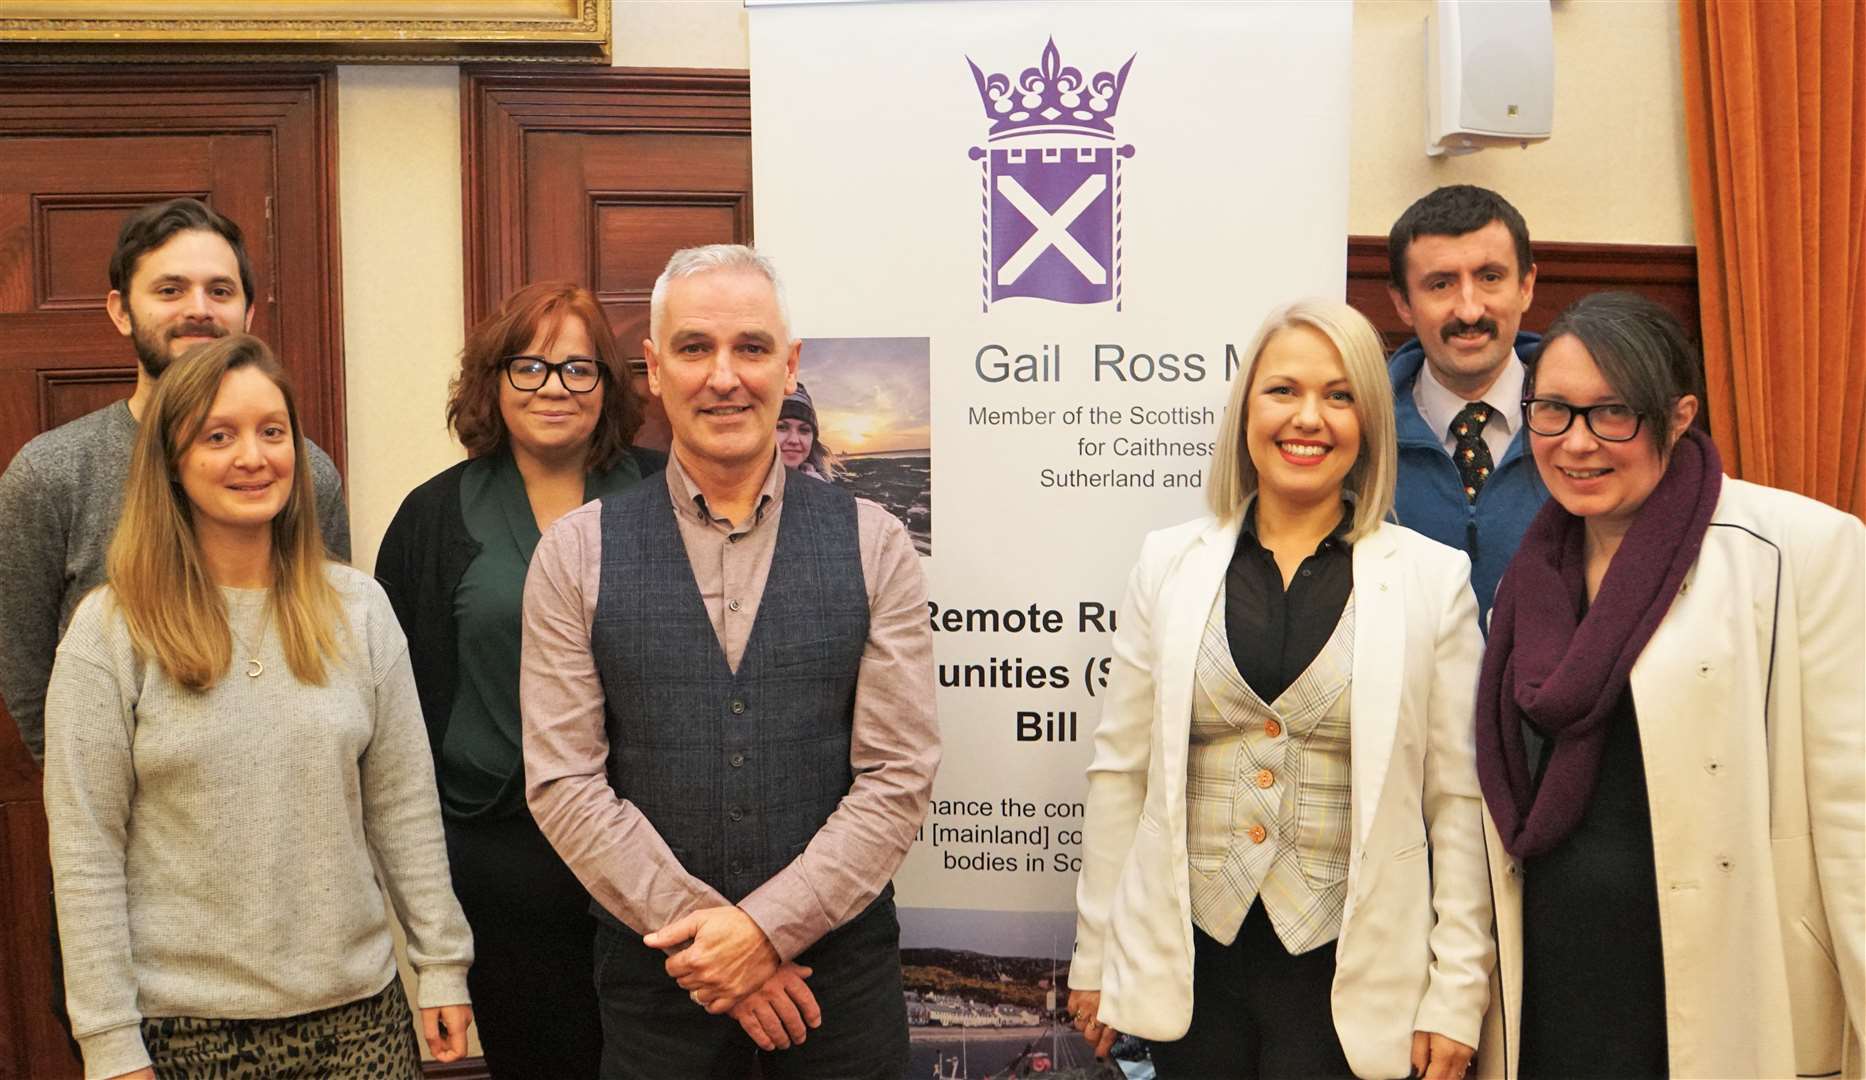 After the meeting at Wick Town Hall in which Gail Ross invited consultation on her proposed Bill to 'safeguard Scotland's remote rural communities'. From left, Tom Barnes and Charlotte Mountford from Lyth Arts Centre, Joan Lawrie from Thurso Community Development Trust, Thurso and northwest Caithness councillor Karl Rosie, Gail Ross MSP, community activist Alexander Glasgow and councillor for north, west and central Sutherland Kirsteen Currie. Pictures: DGS